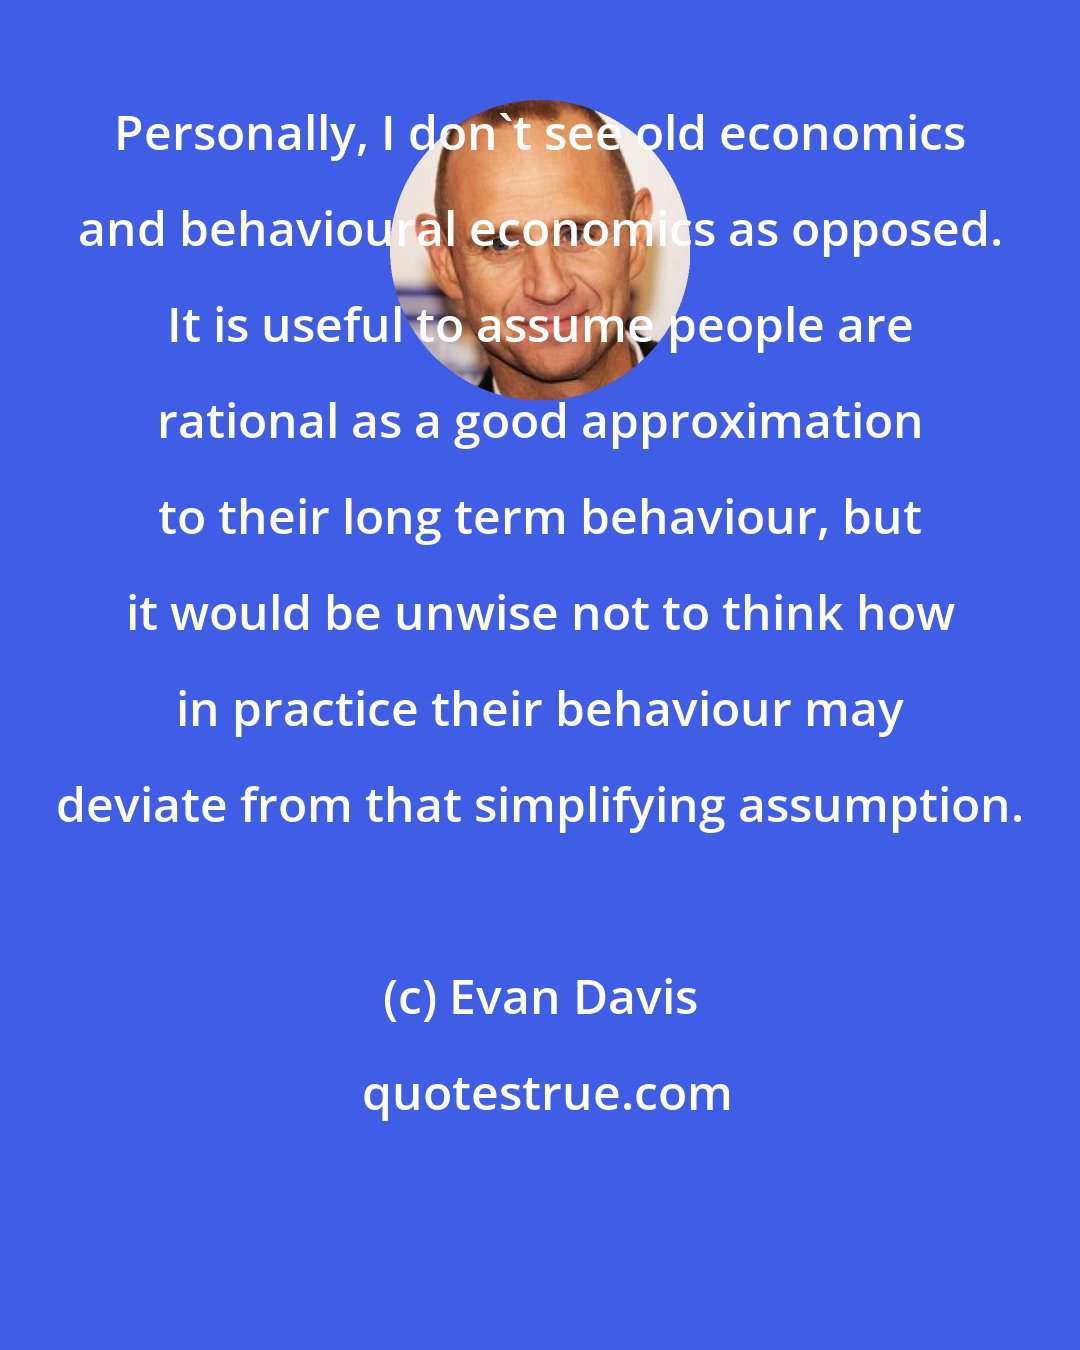 Evan Davis: Personally, I don't see old economics and behavioural economics as opposed. It is useful to assume people are rational as a good approximation to their long term behaviour, but it would be unwise not to think how in practice their behaviour may deviate from that simplifying assumption.